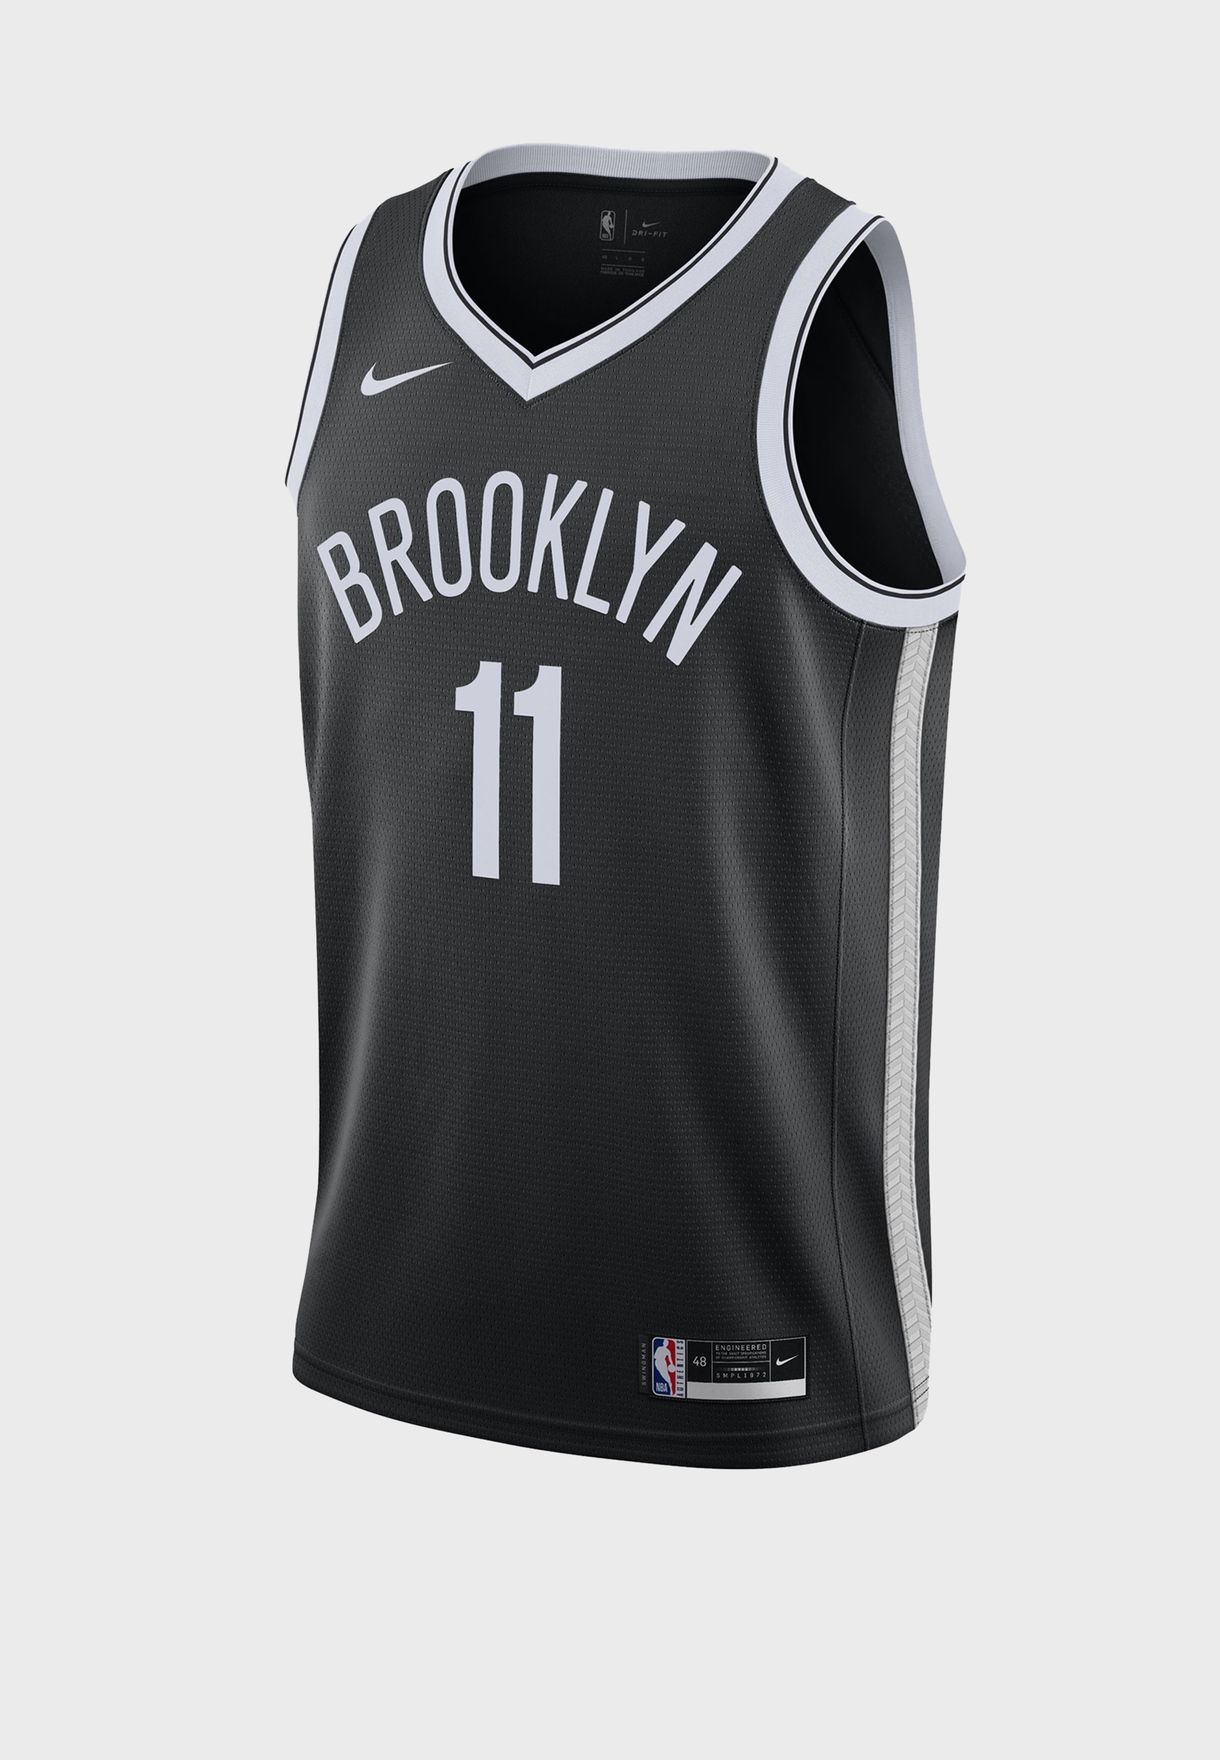 Brooklyn Nets Kyrie Irving Fanatics Authentic Game-Used #11 White Jersey  vs. New York Knicks on